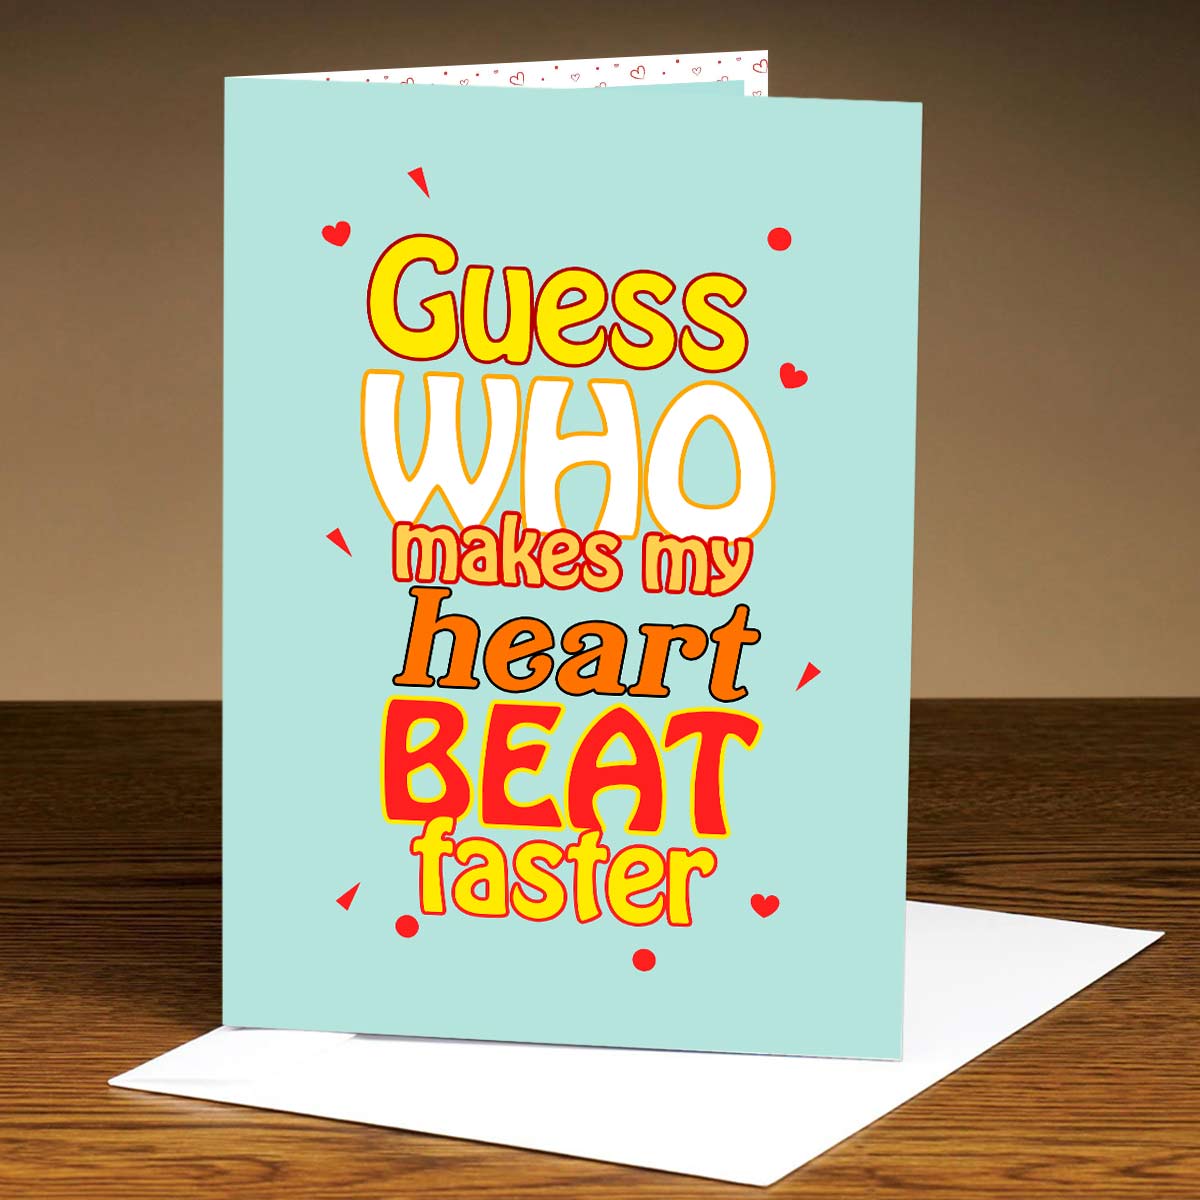 Makes my heart beat faster Mirror Card